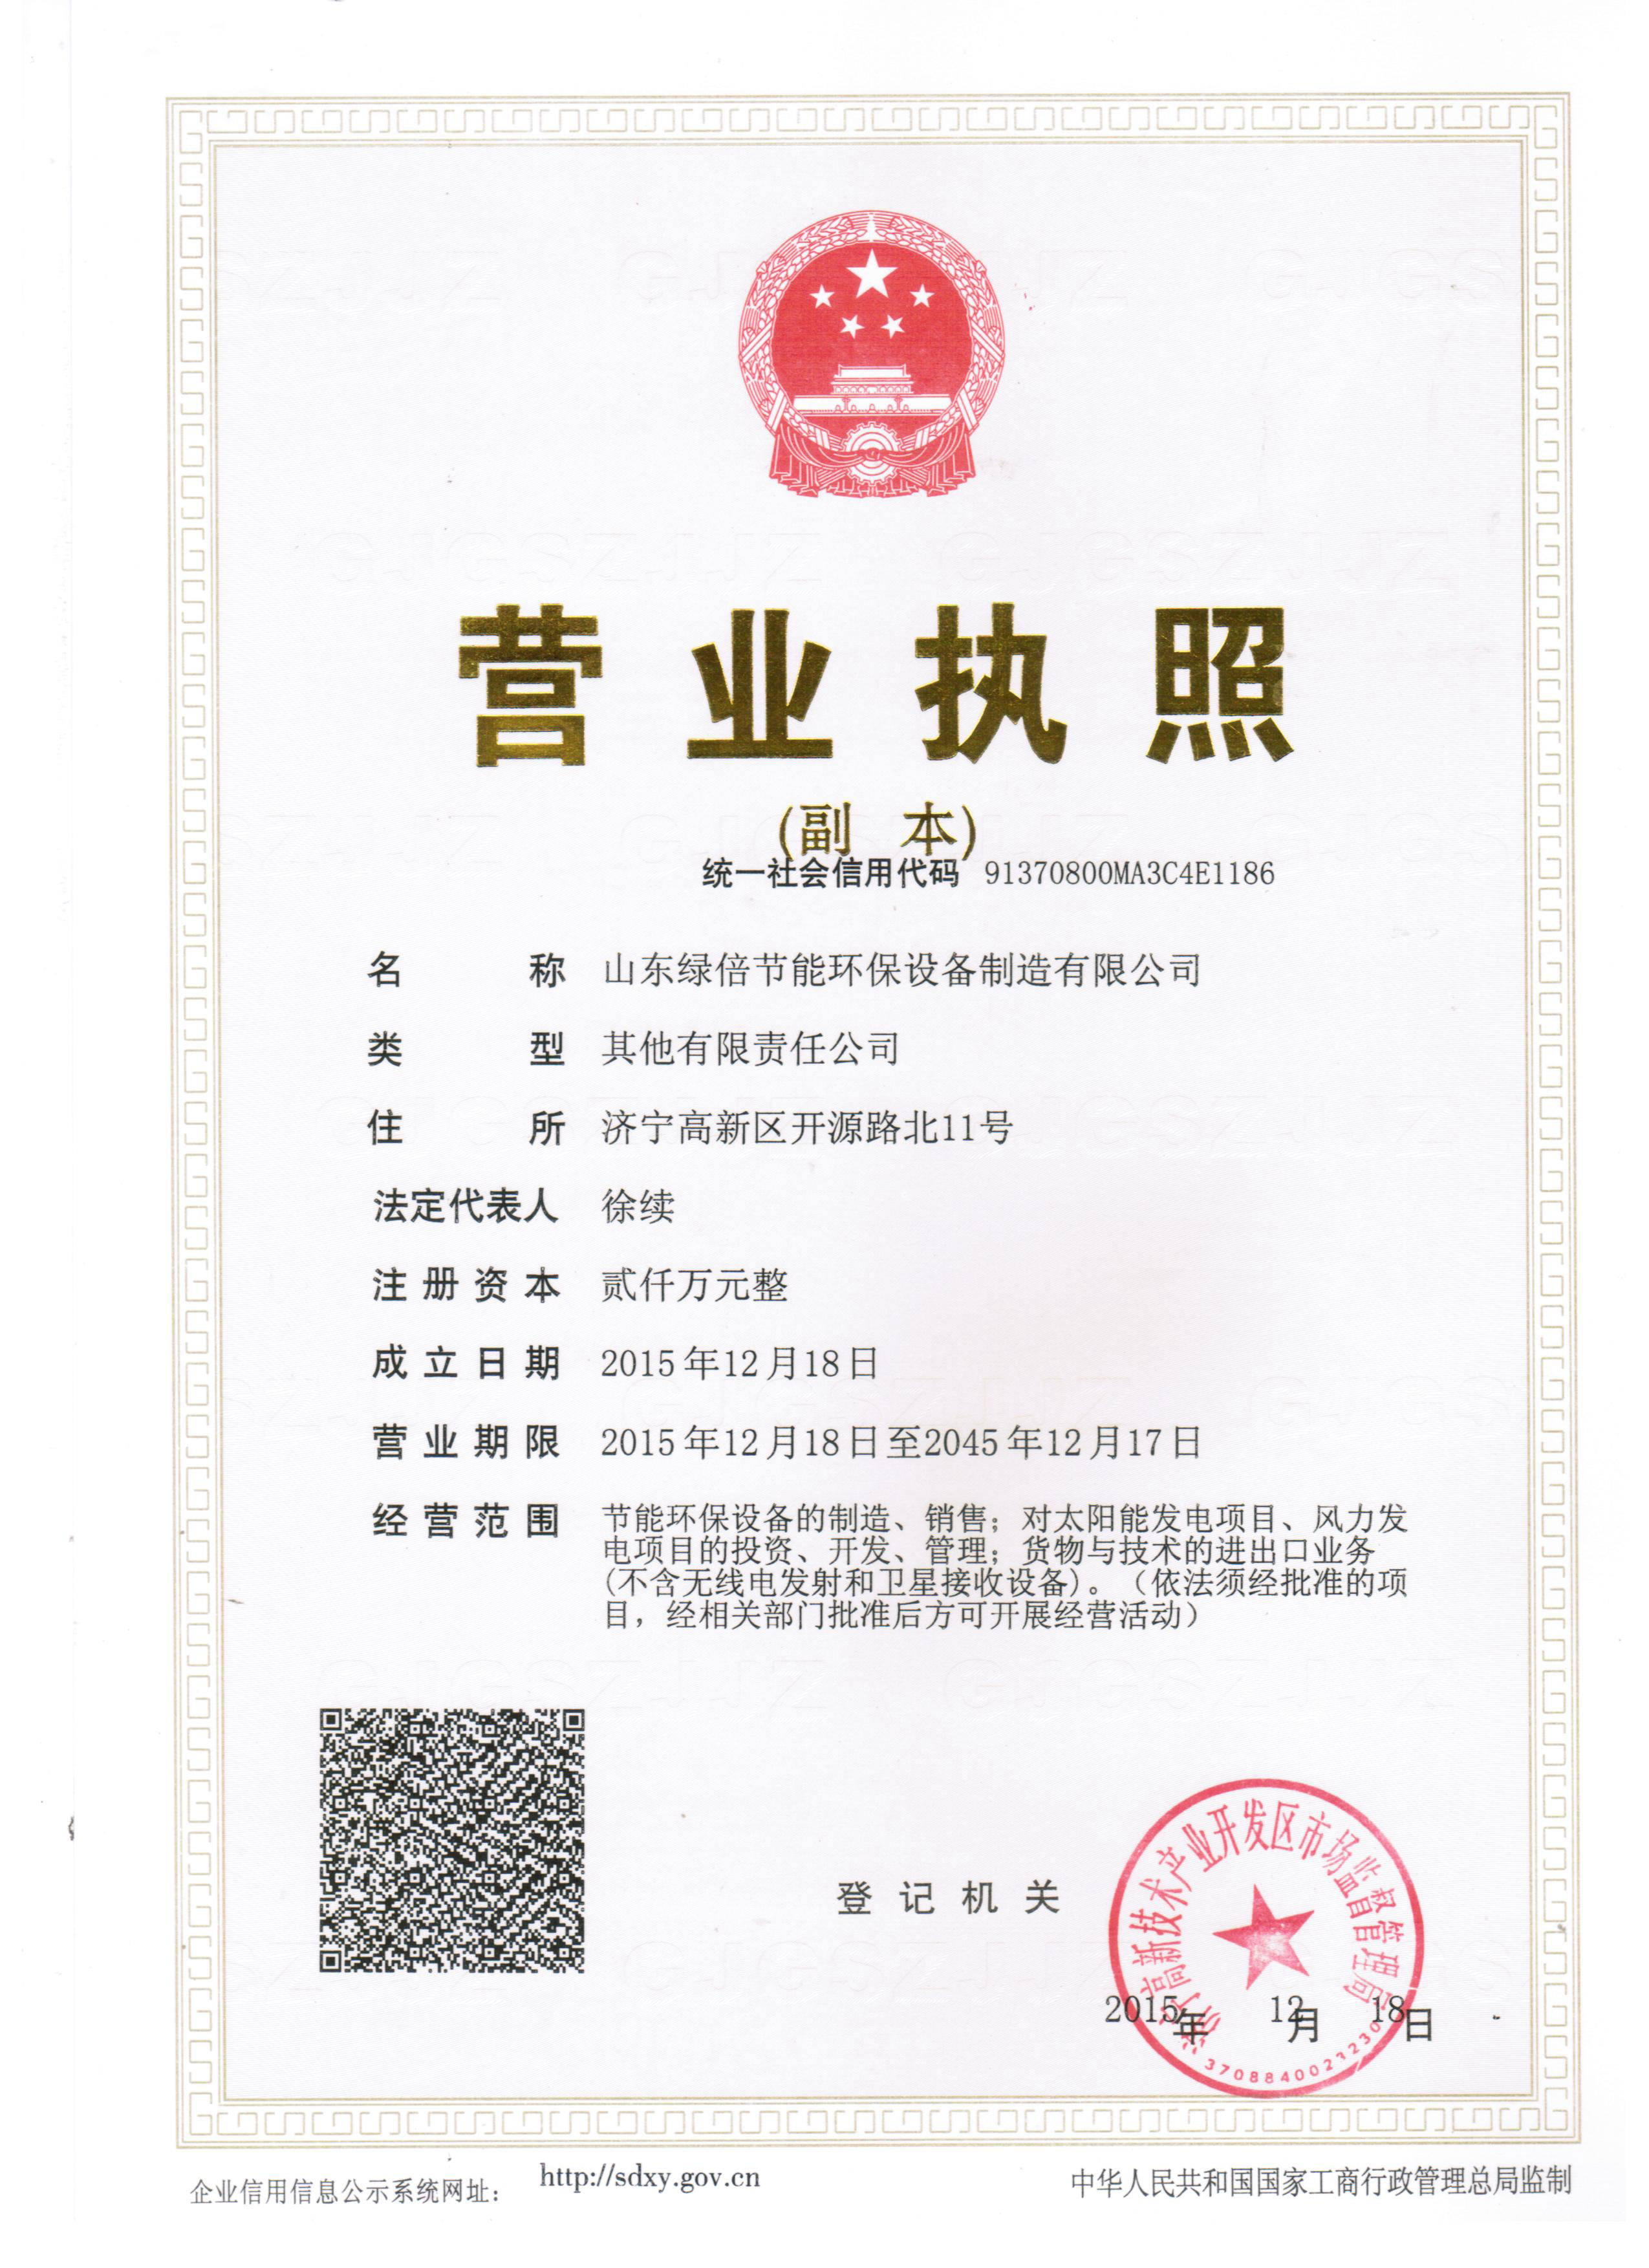 Successfully Registered Shandong Lvbei Energy Conservation and Environmental Protection Equipment Manufacturing Co., Ltd.